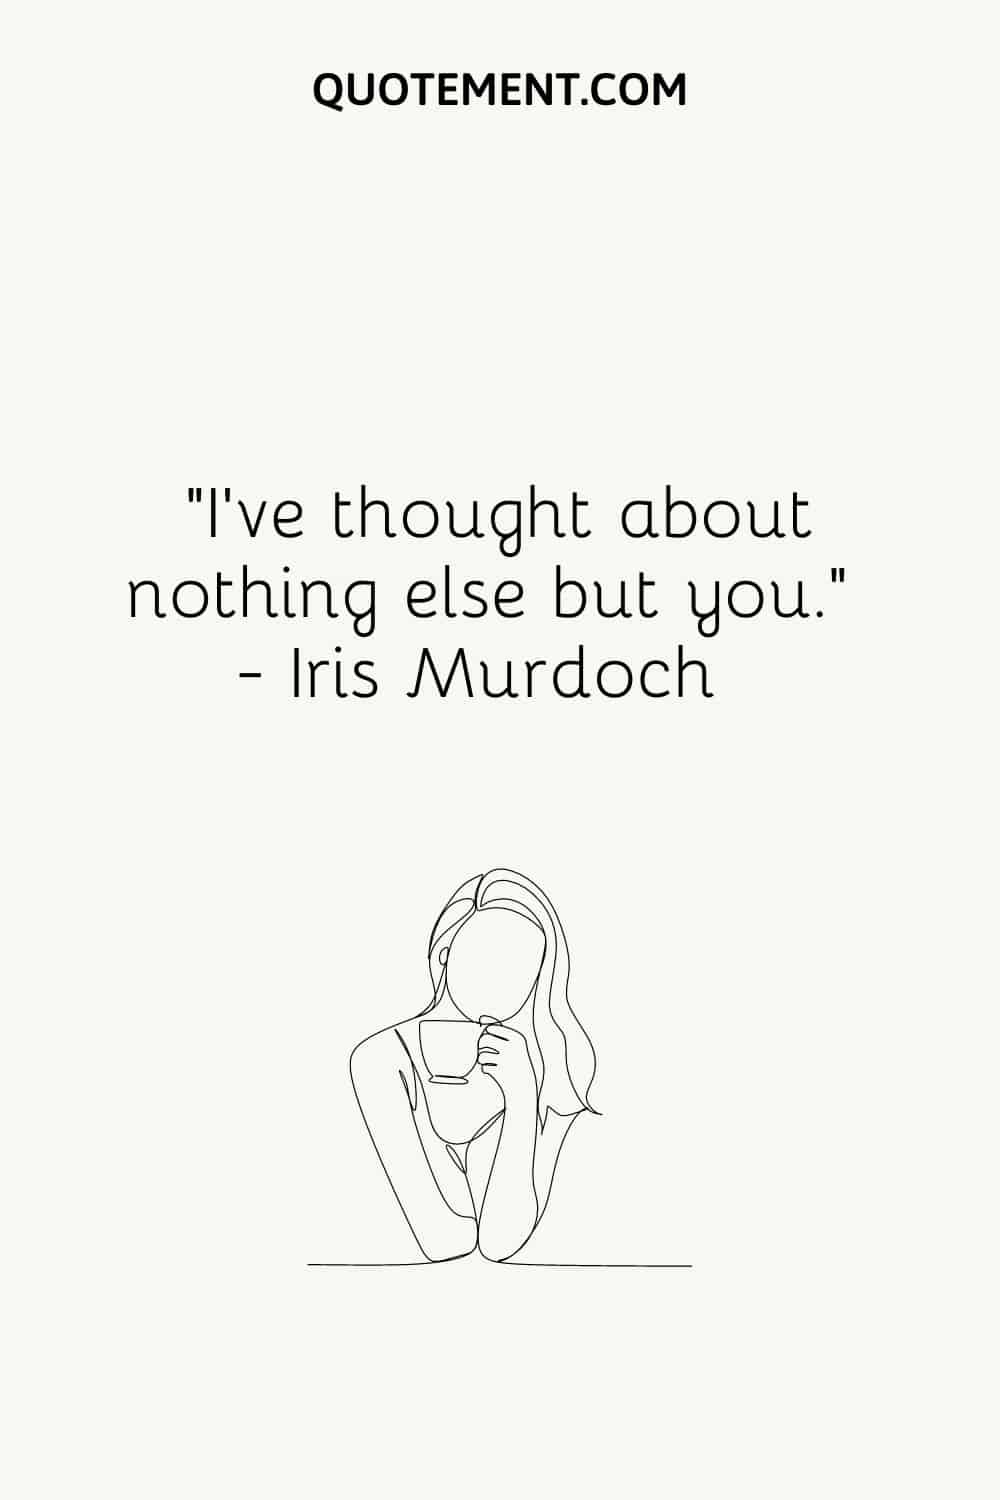 girl holding a cup illustration representing thinking of u quote